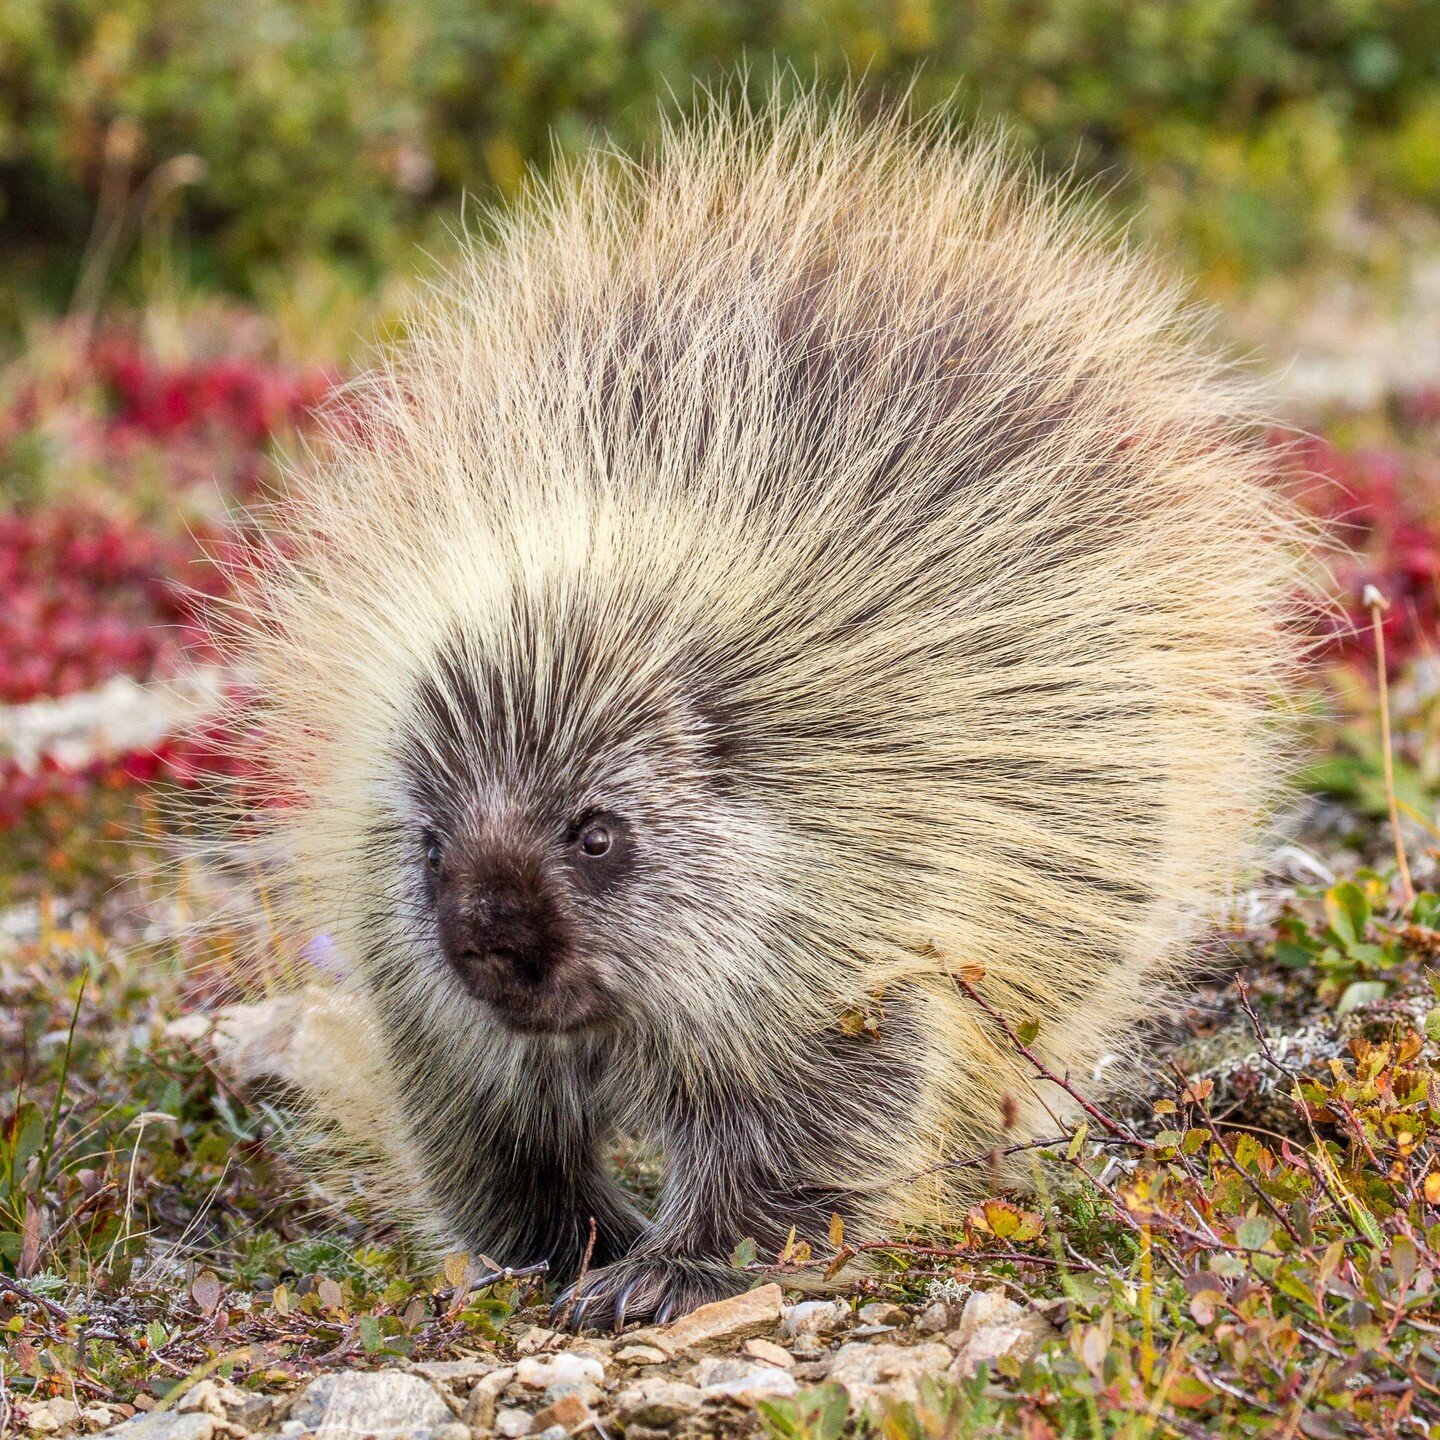 Meet Alaska's prickly resident! Our online tours unveil the hidden treasures of the wilderness, like this adorable porcupine encounter. Join us for unforgettable adventures! 🌲🦔 #AlaskaTours #WildlifeEncounters #PorcupineLove&quot;